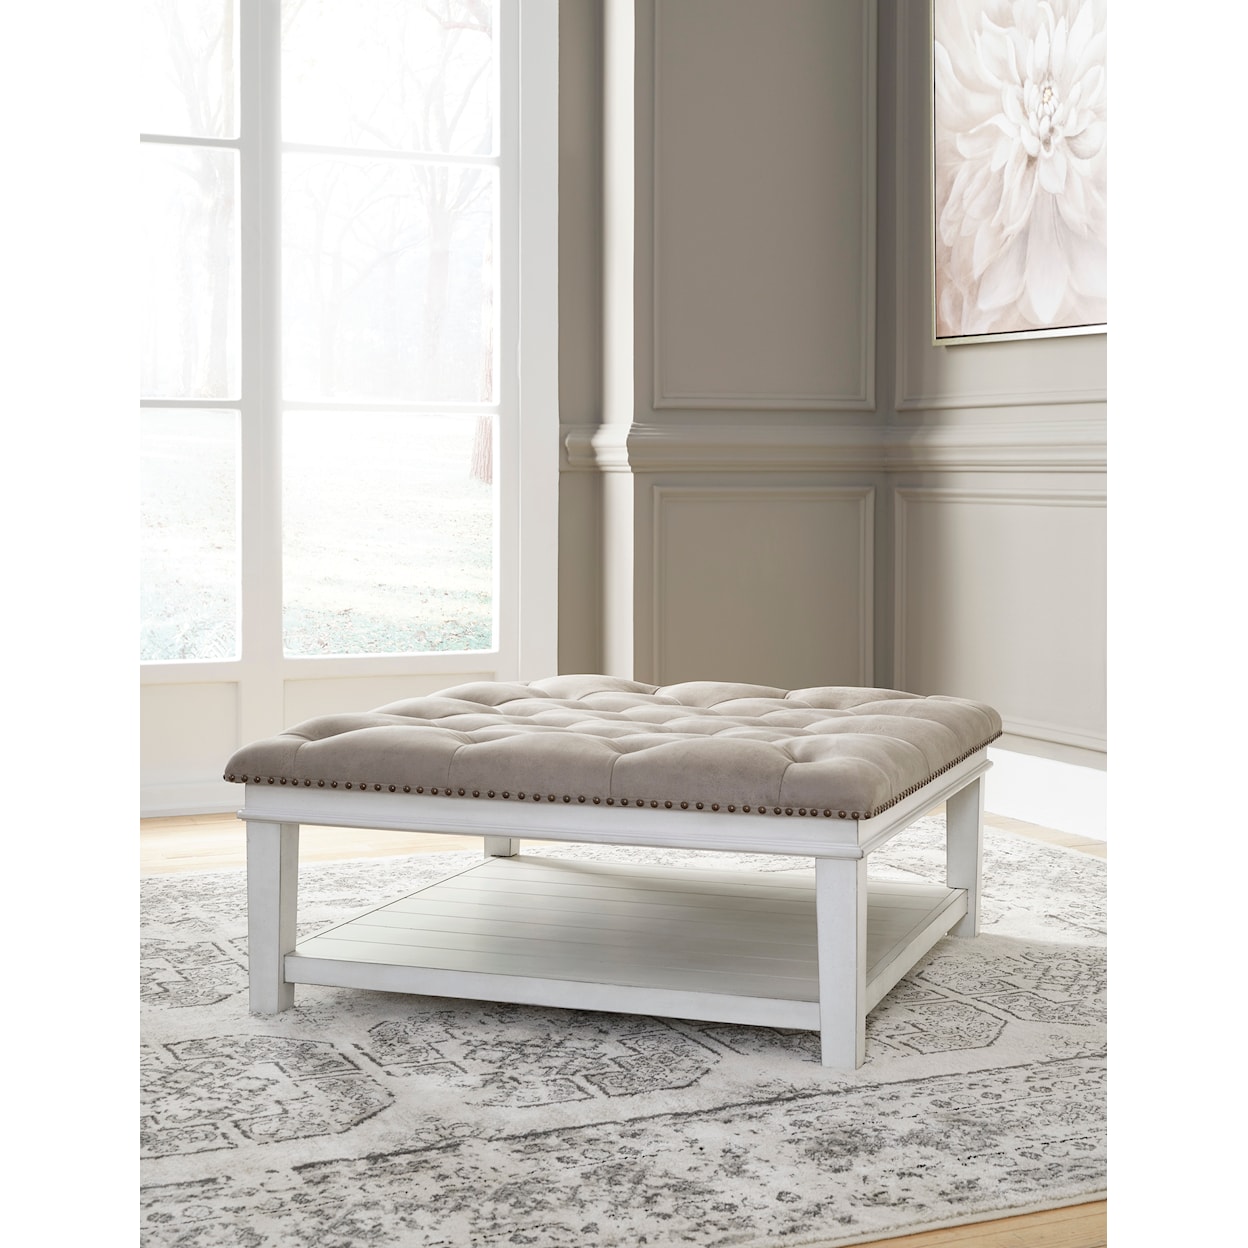 Benchcraft Kanwyn Upholstered Ottoman Coffee Table